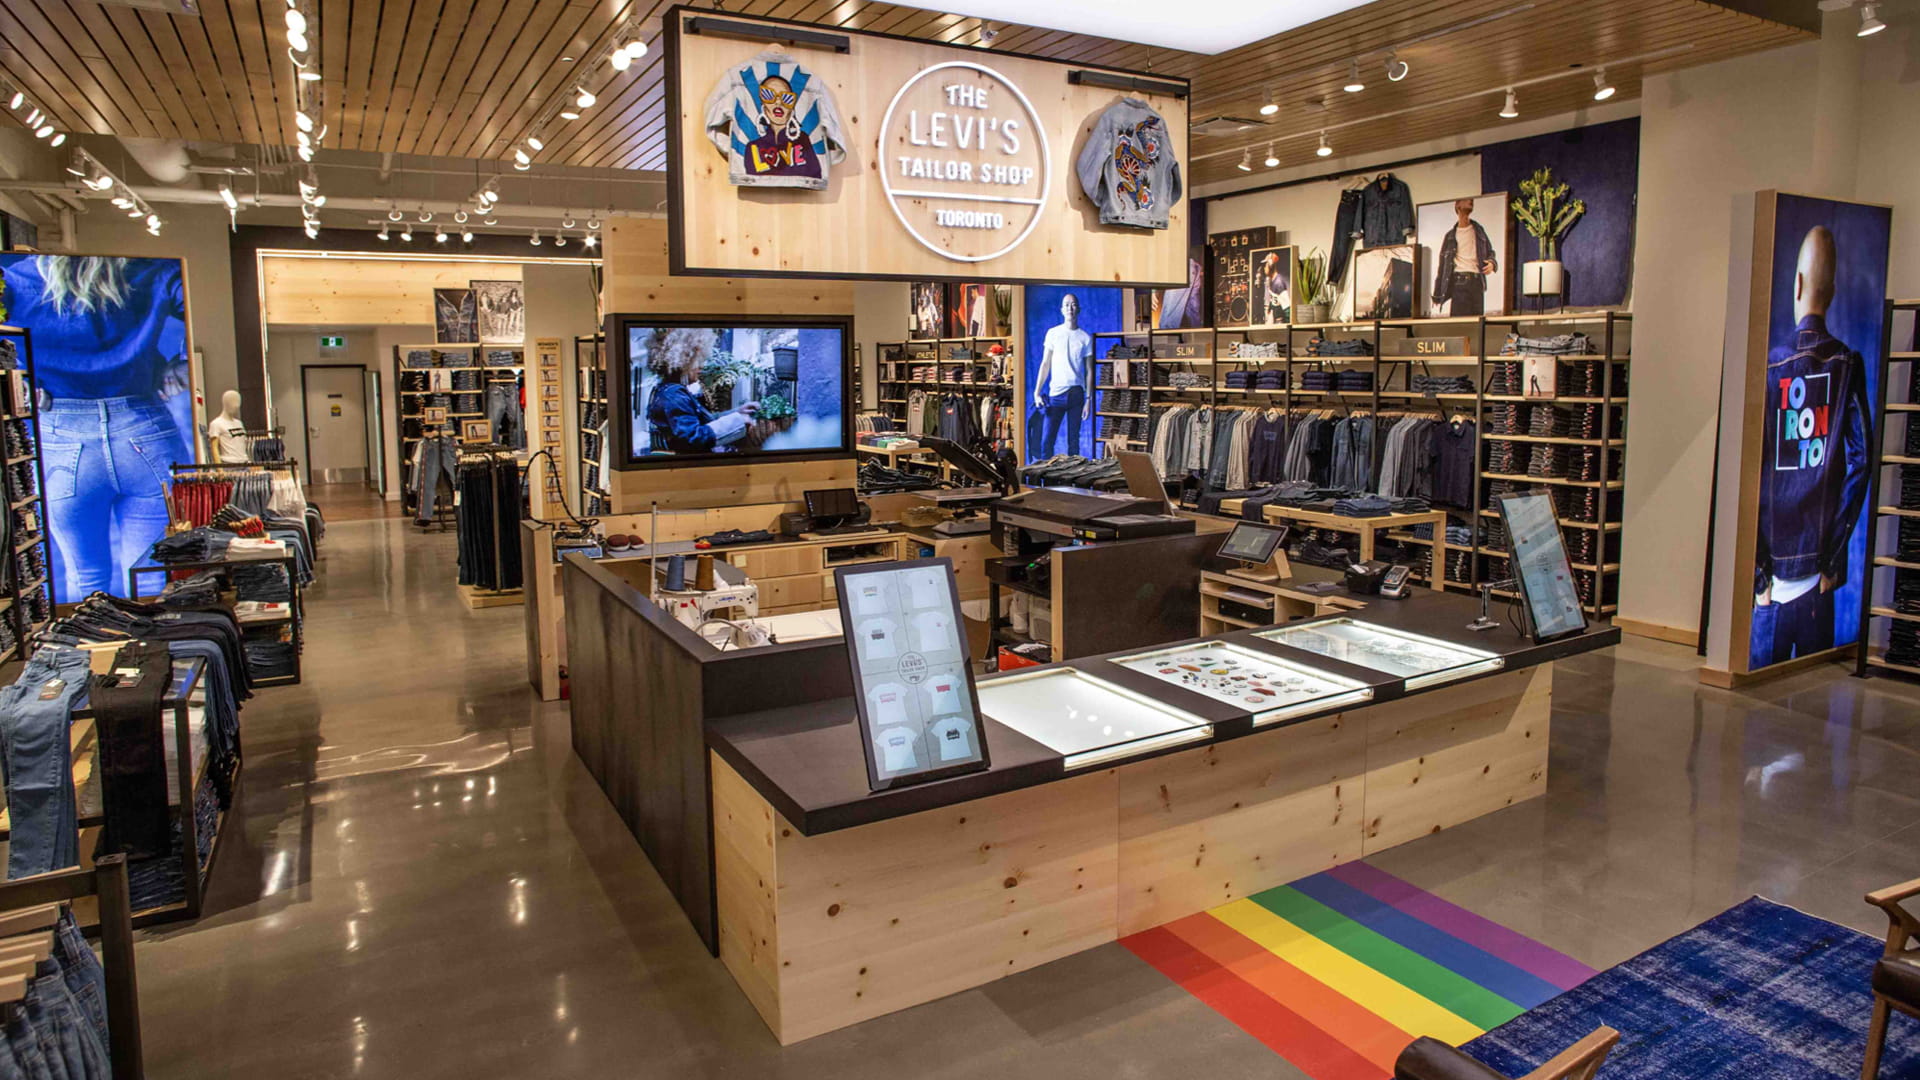 Denim retailer Levi's on expansion mode, adds two stores in India, Canada |  Retail News USA